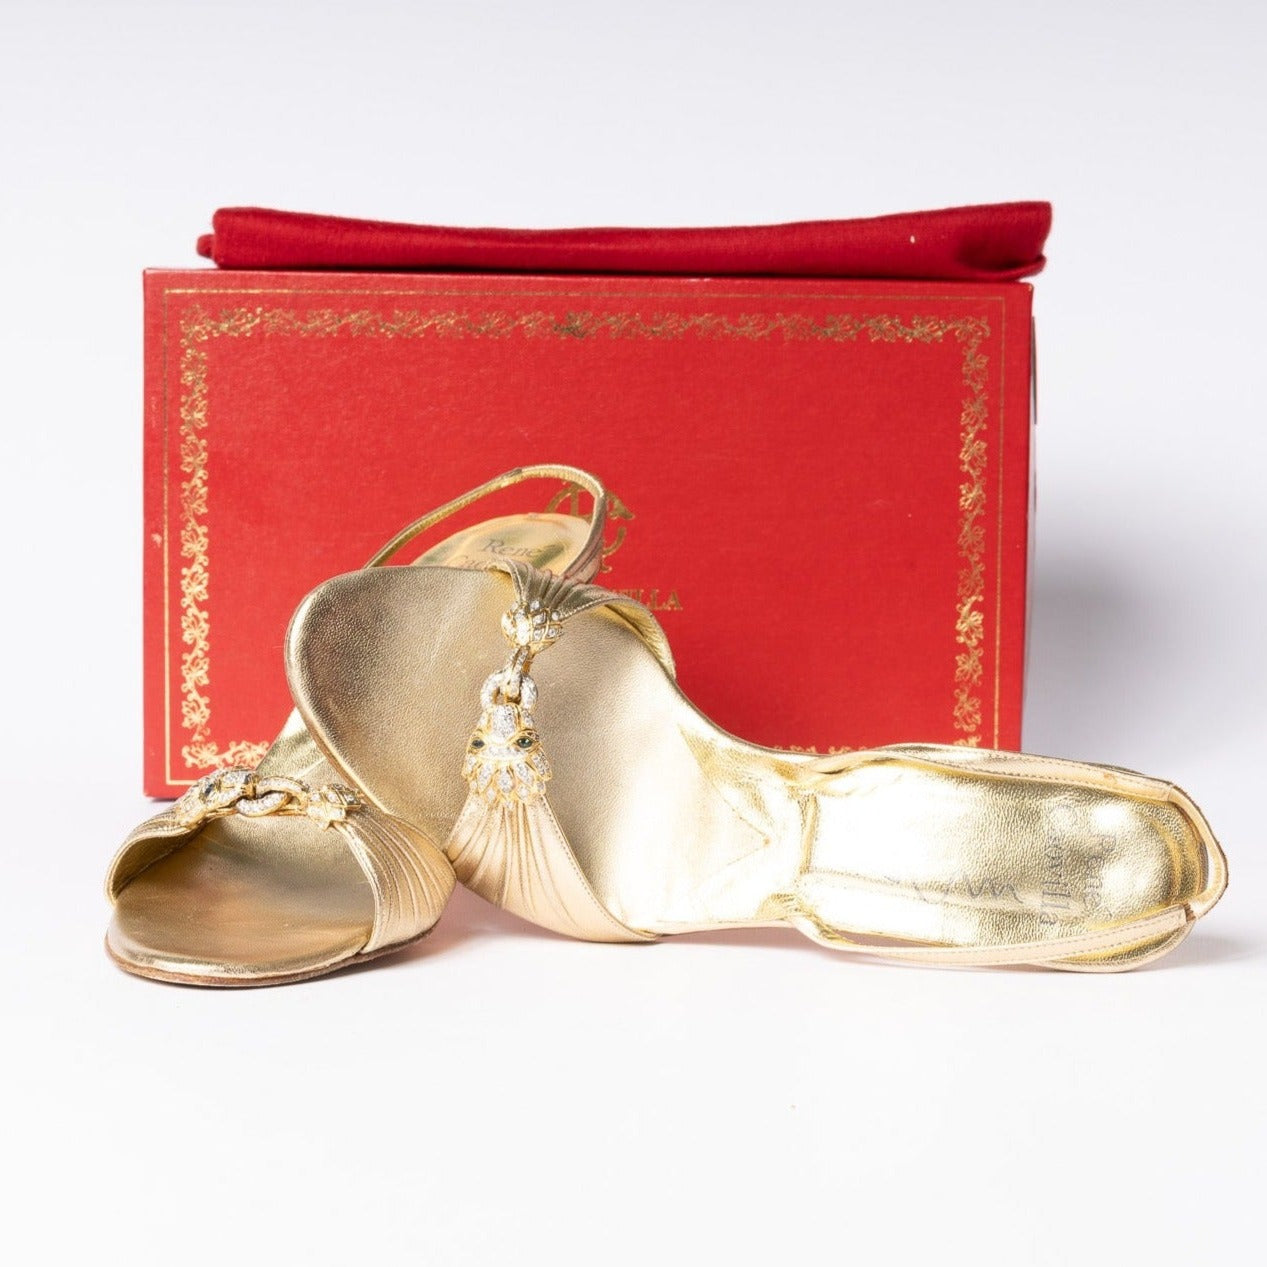 Rene Caovilla Gold Heels - Embodied elegance and captivating shine for an unforgettable fashion statement.